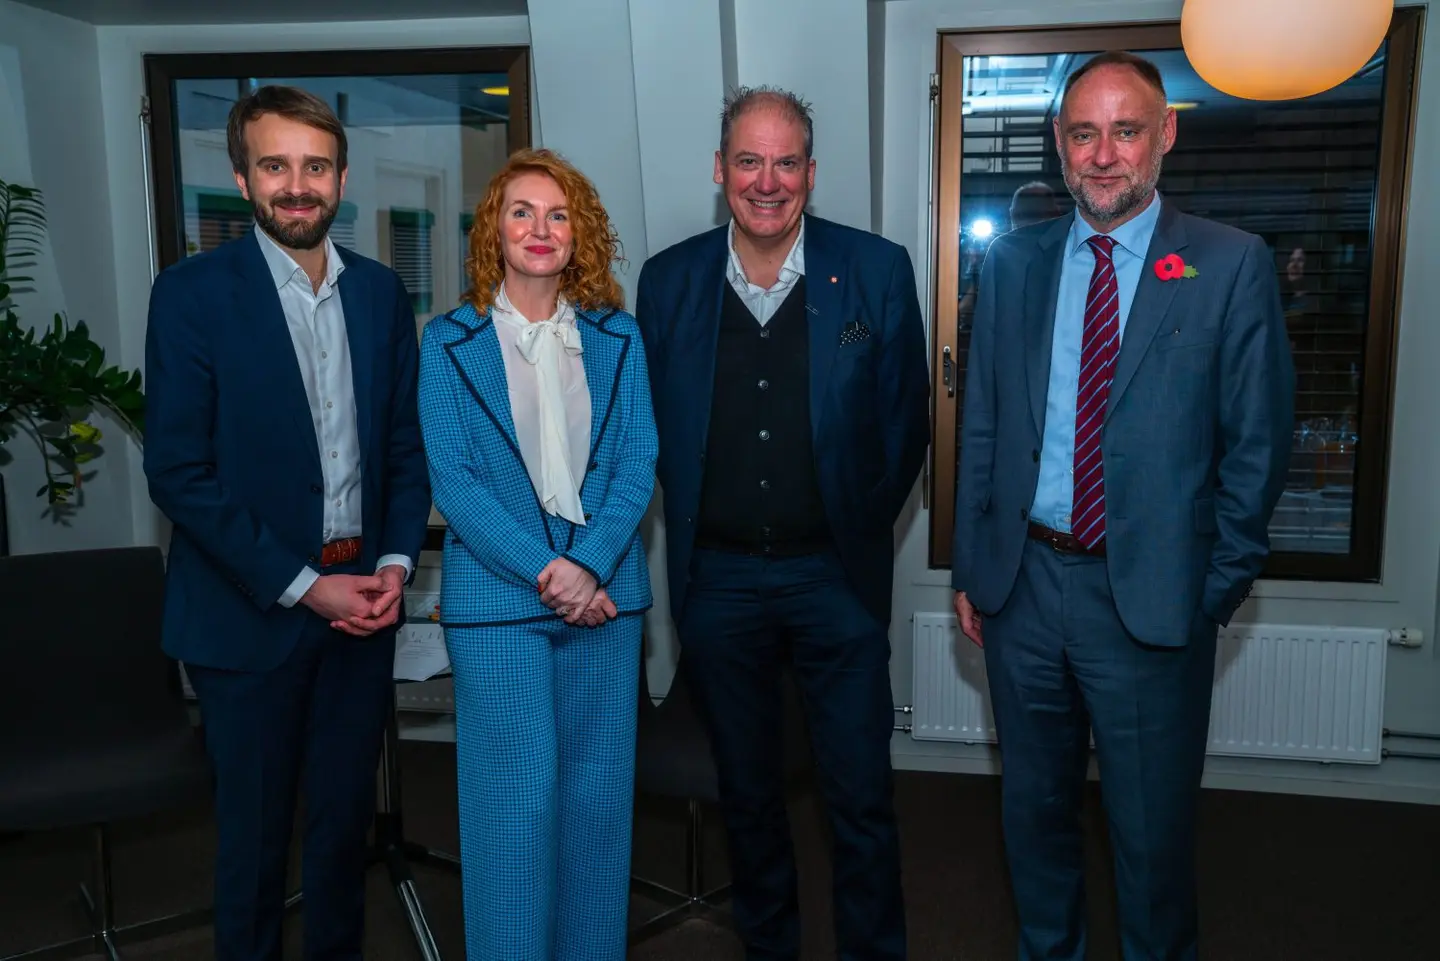 Norwegian Minister of Trade and Industry Jan Christian Vestre, Meghan Beaton from the Norwegian Film Commission, Adrian Wootton from the British Film Commission, and His Majesty's Ambassador to the Kingdom of Norway Richard Wood